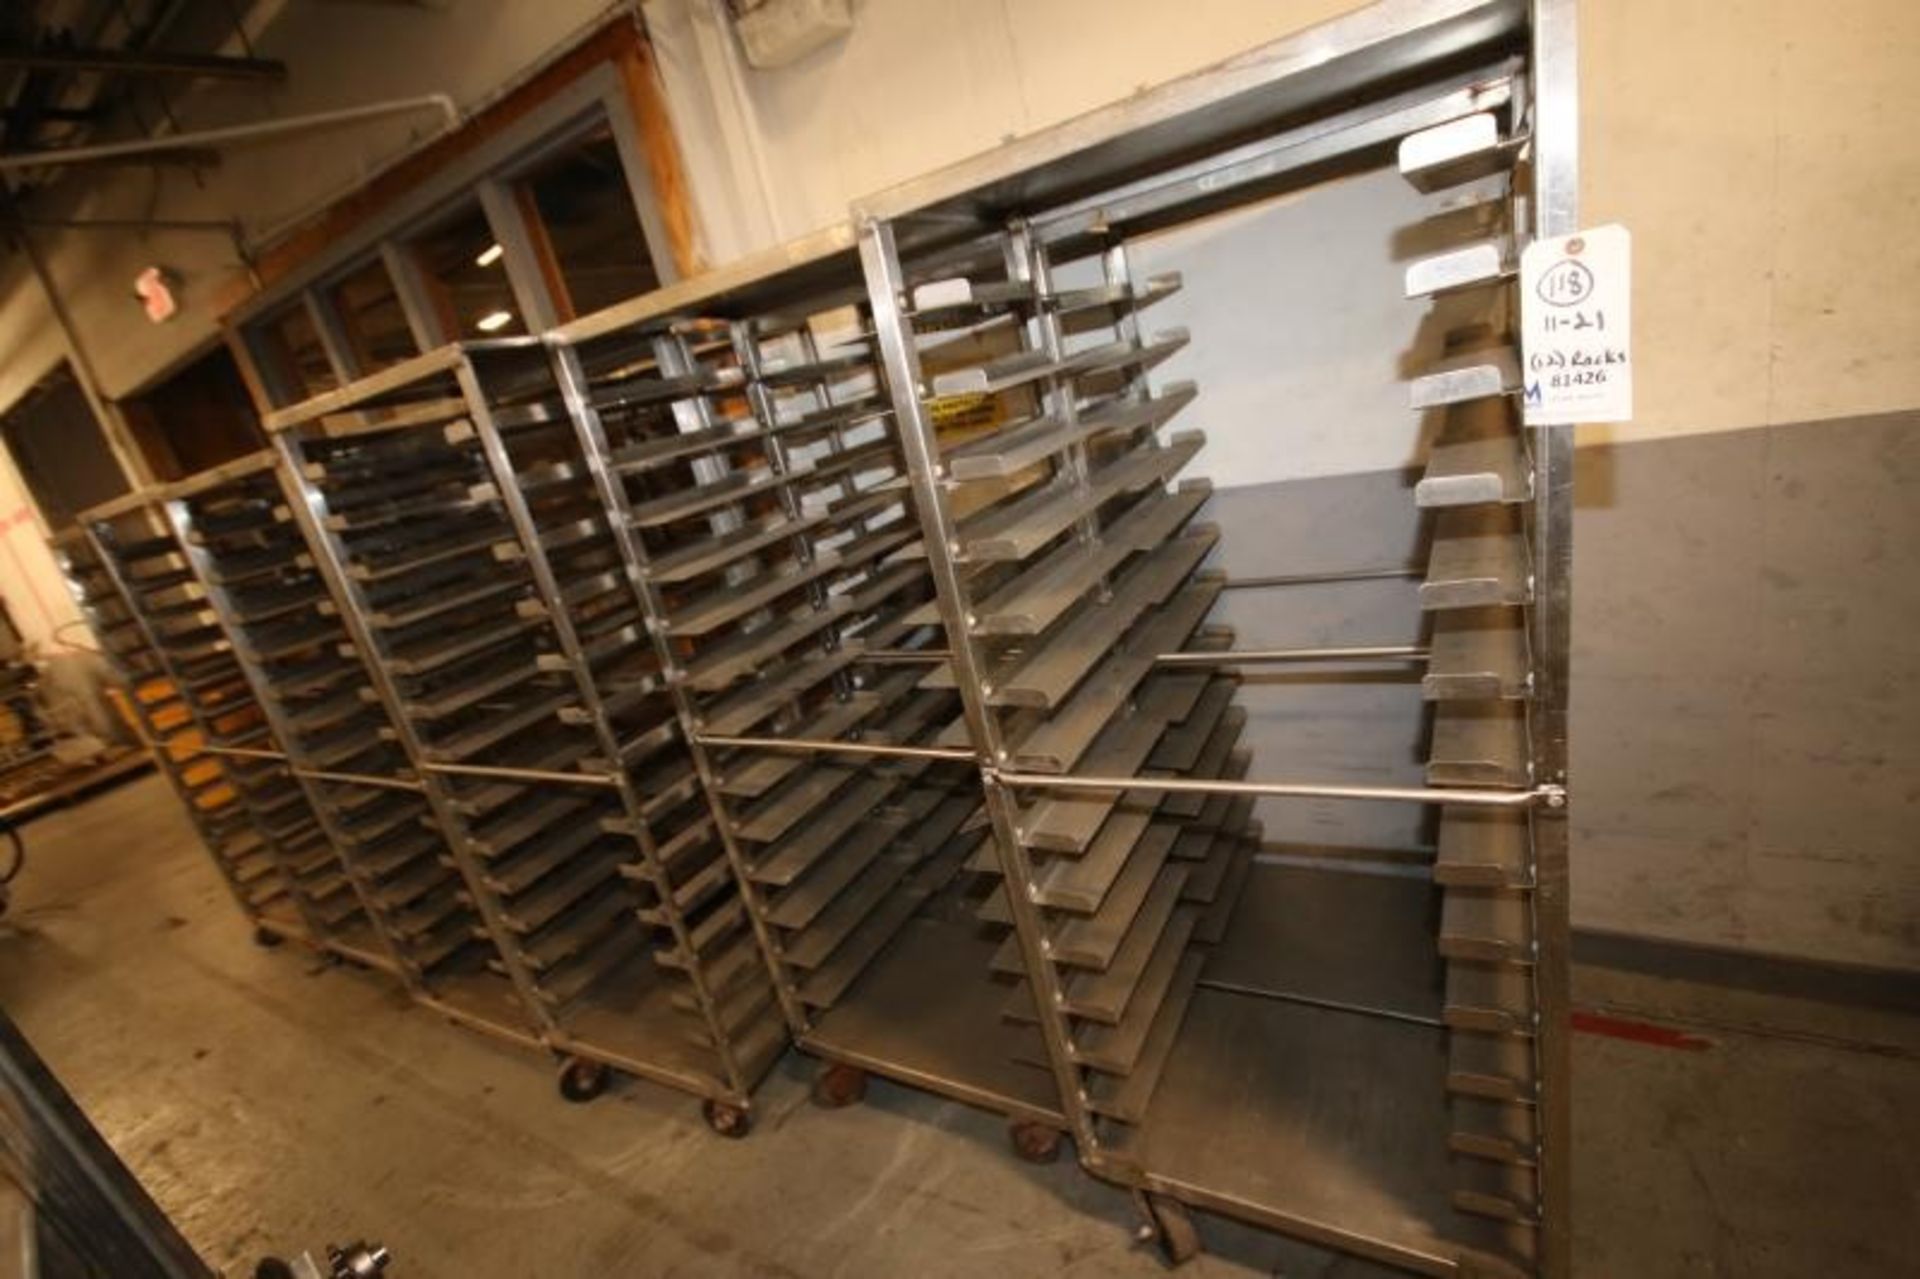 Lot of (12) 29" L x 18" D x 67" H S/S Portable Racks with Dividers (INV#81426)(Located @ the MDG - Image 2 of 3